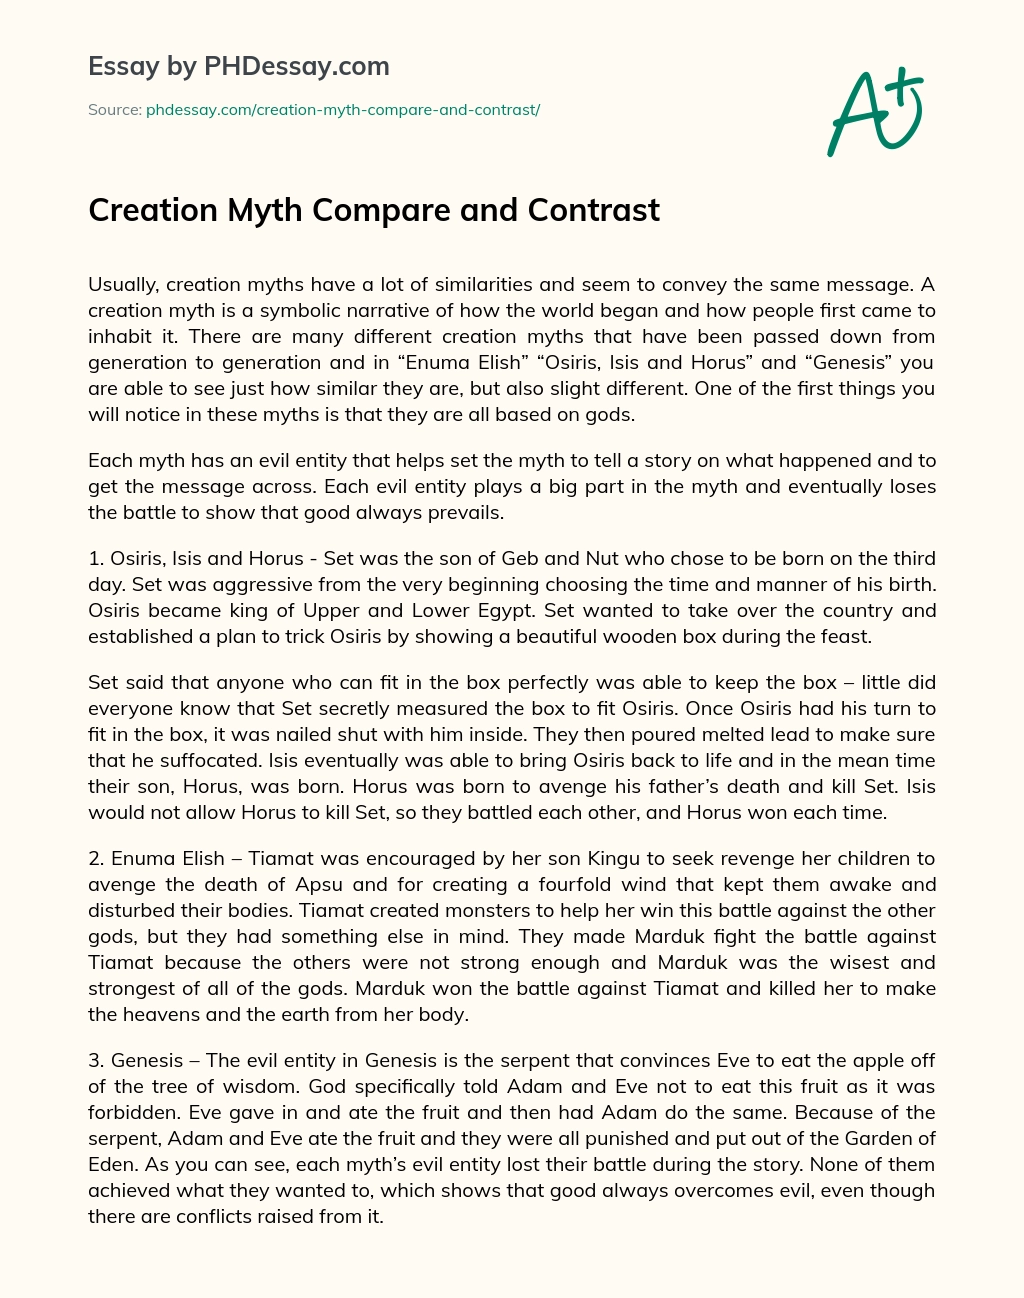 Creation Myth Compare and Contrast essay